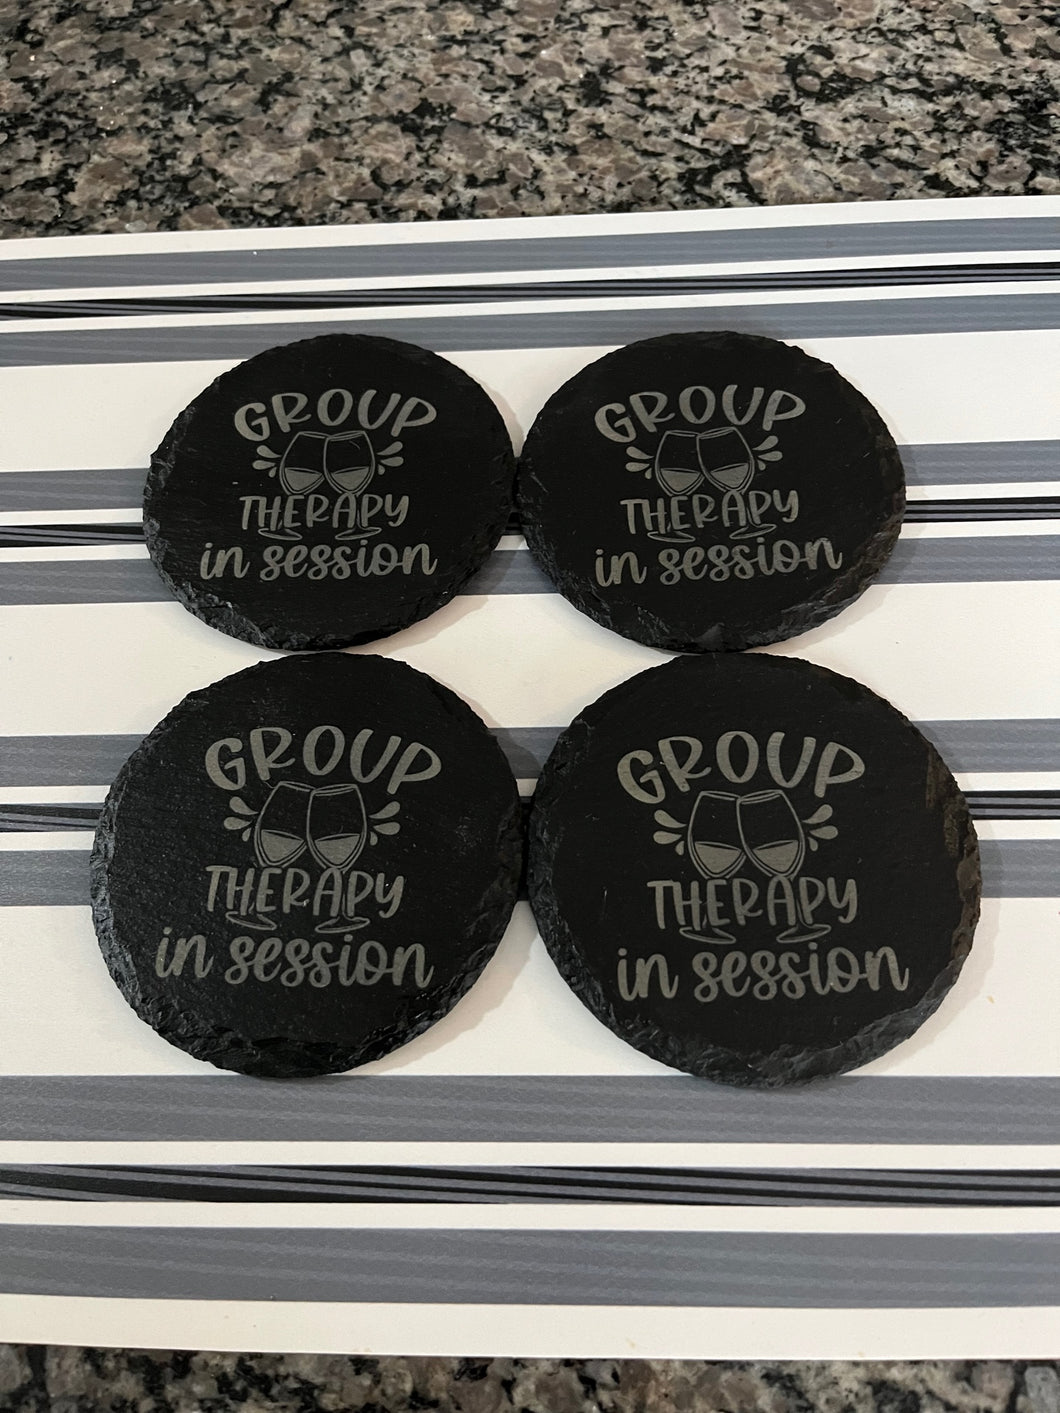 Engraved Slate Coasters - Group Therapy In Session